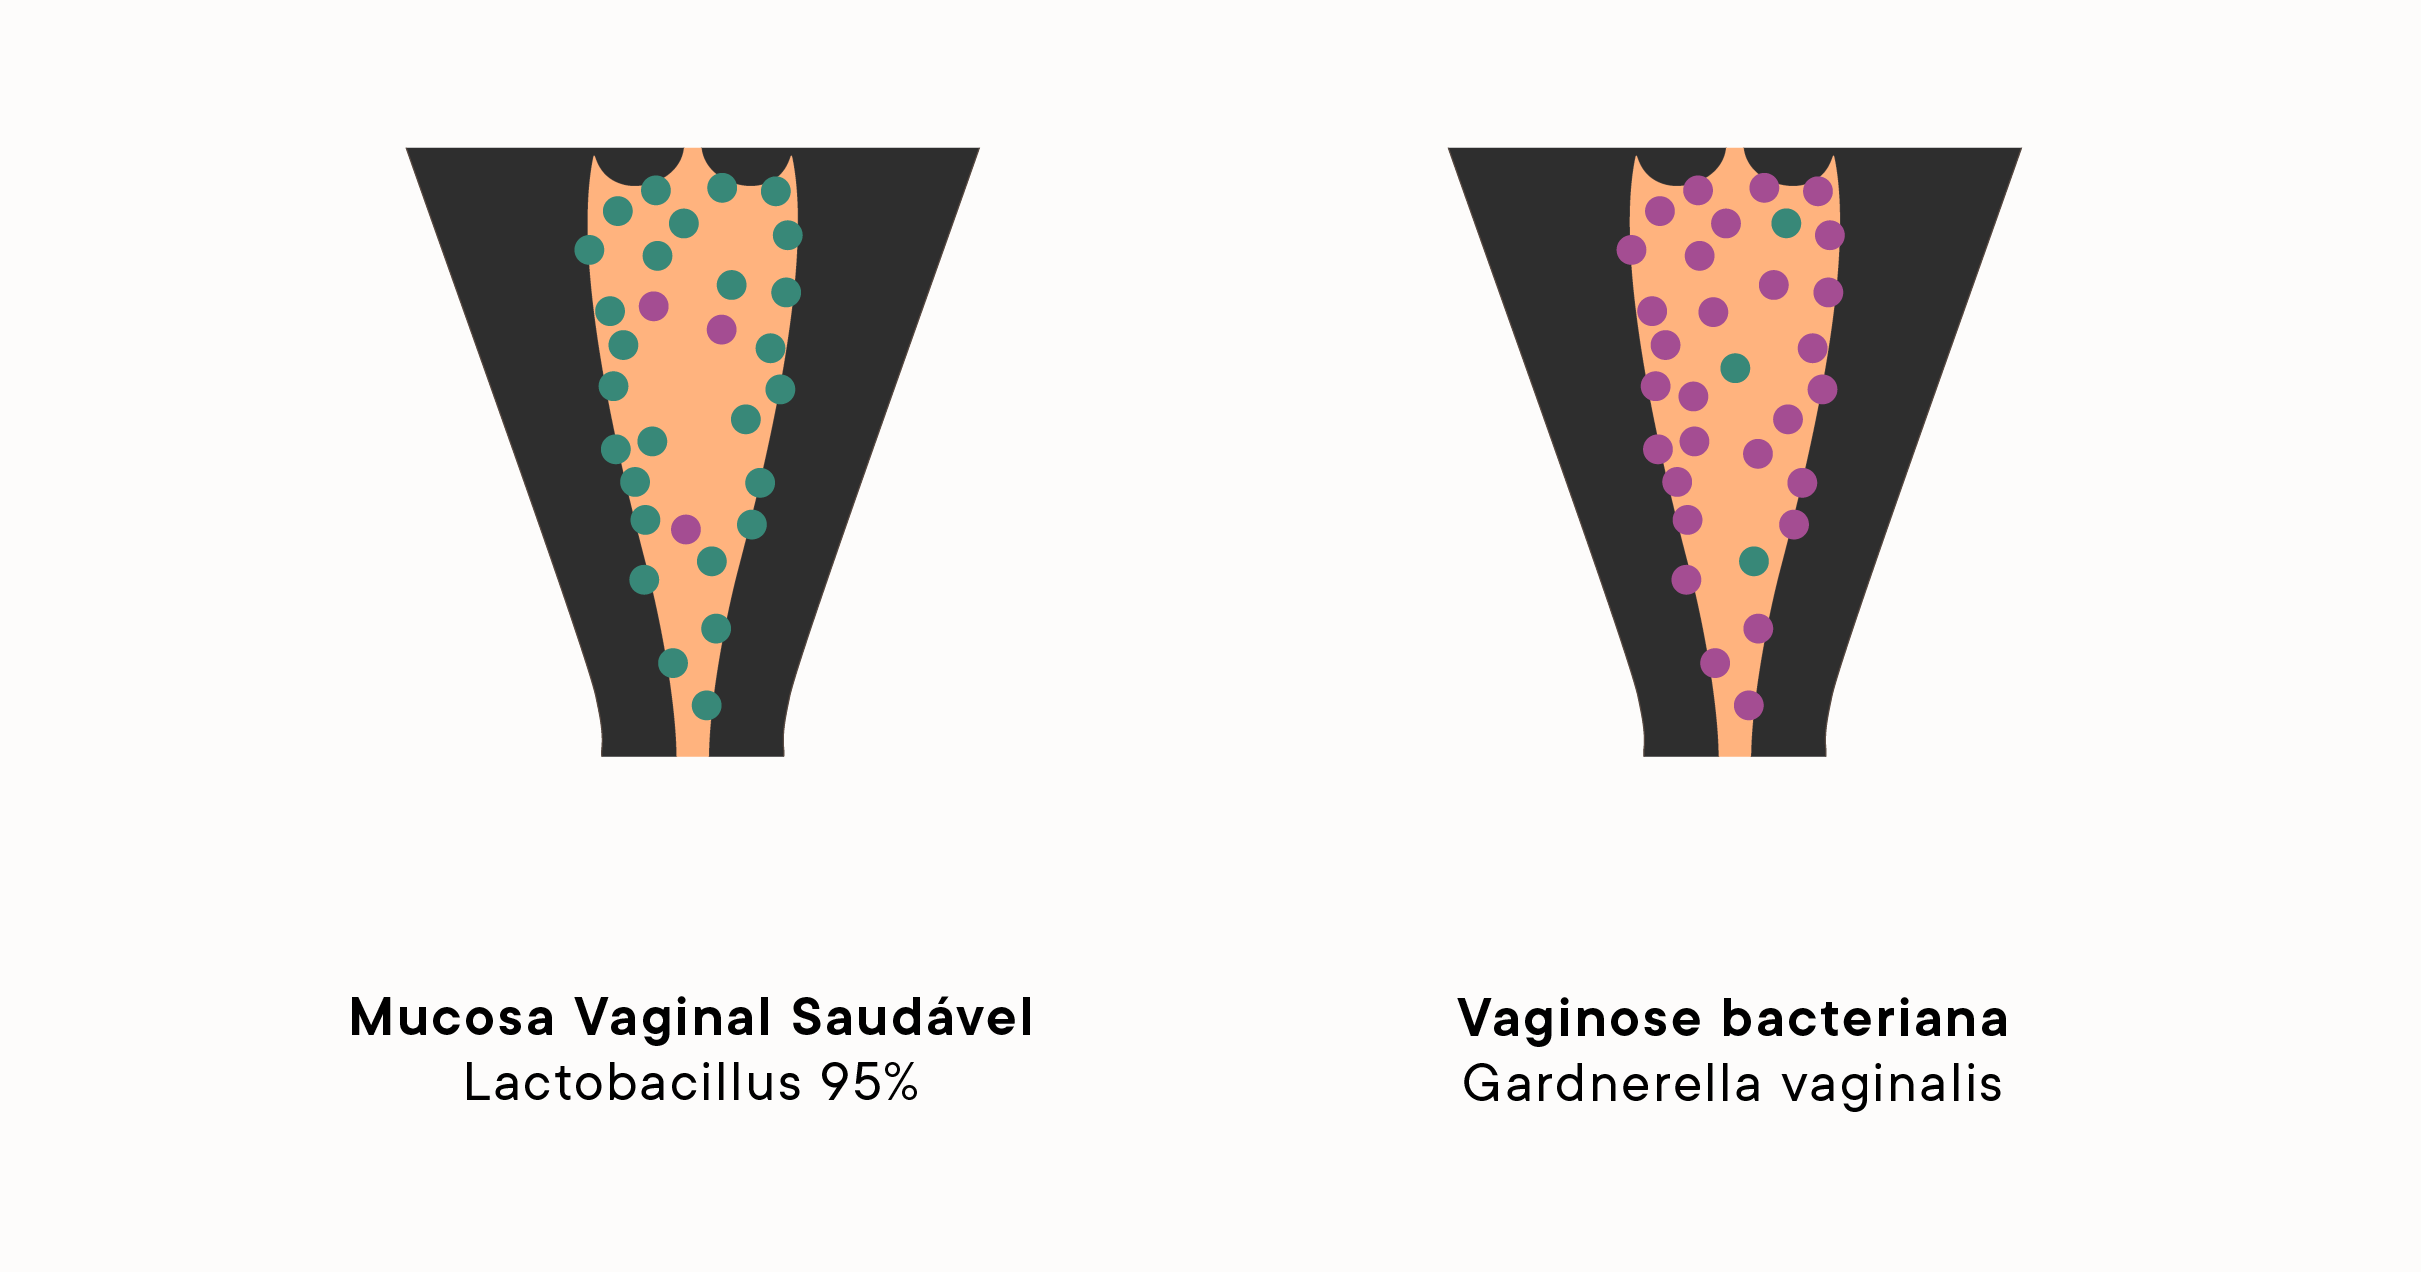 comparative illustration of two vaginal muscoa, one healthy and one with bacterial vaginosis